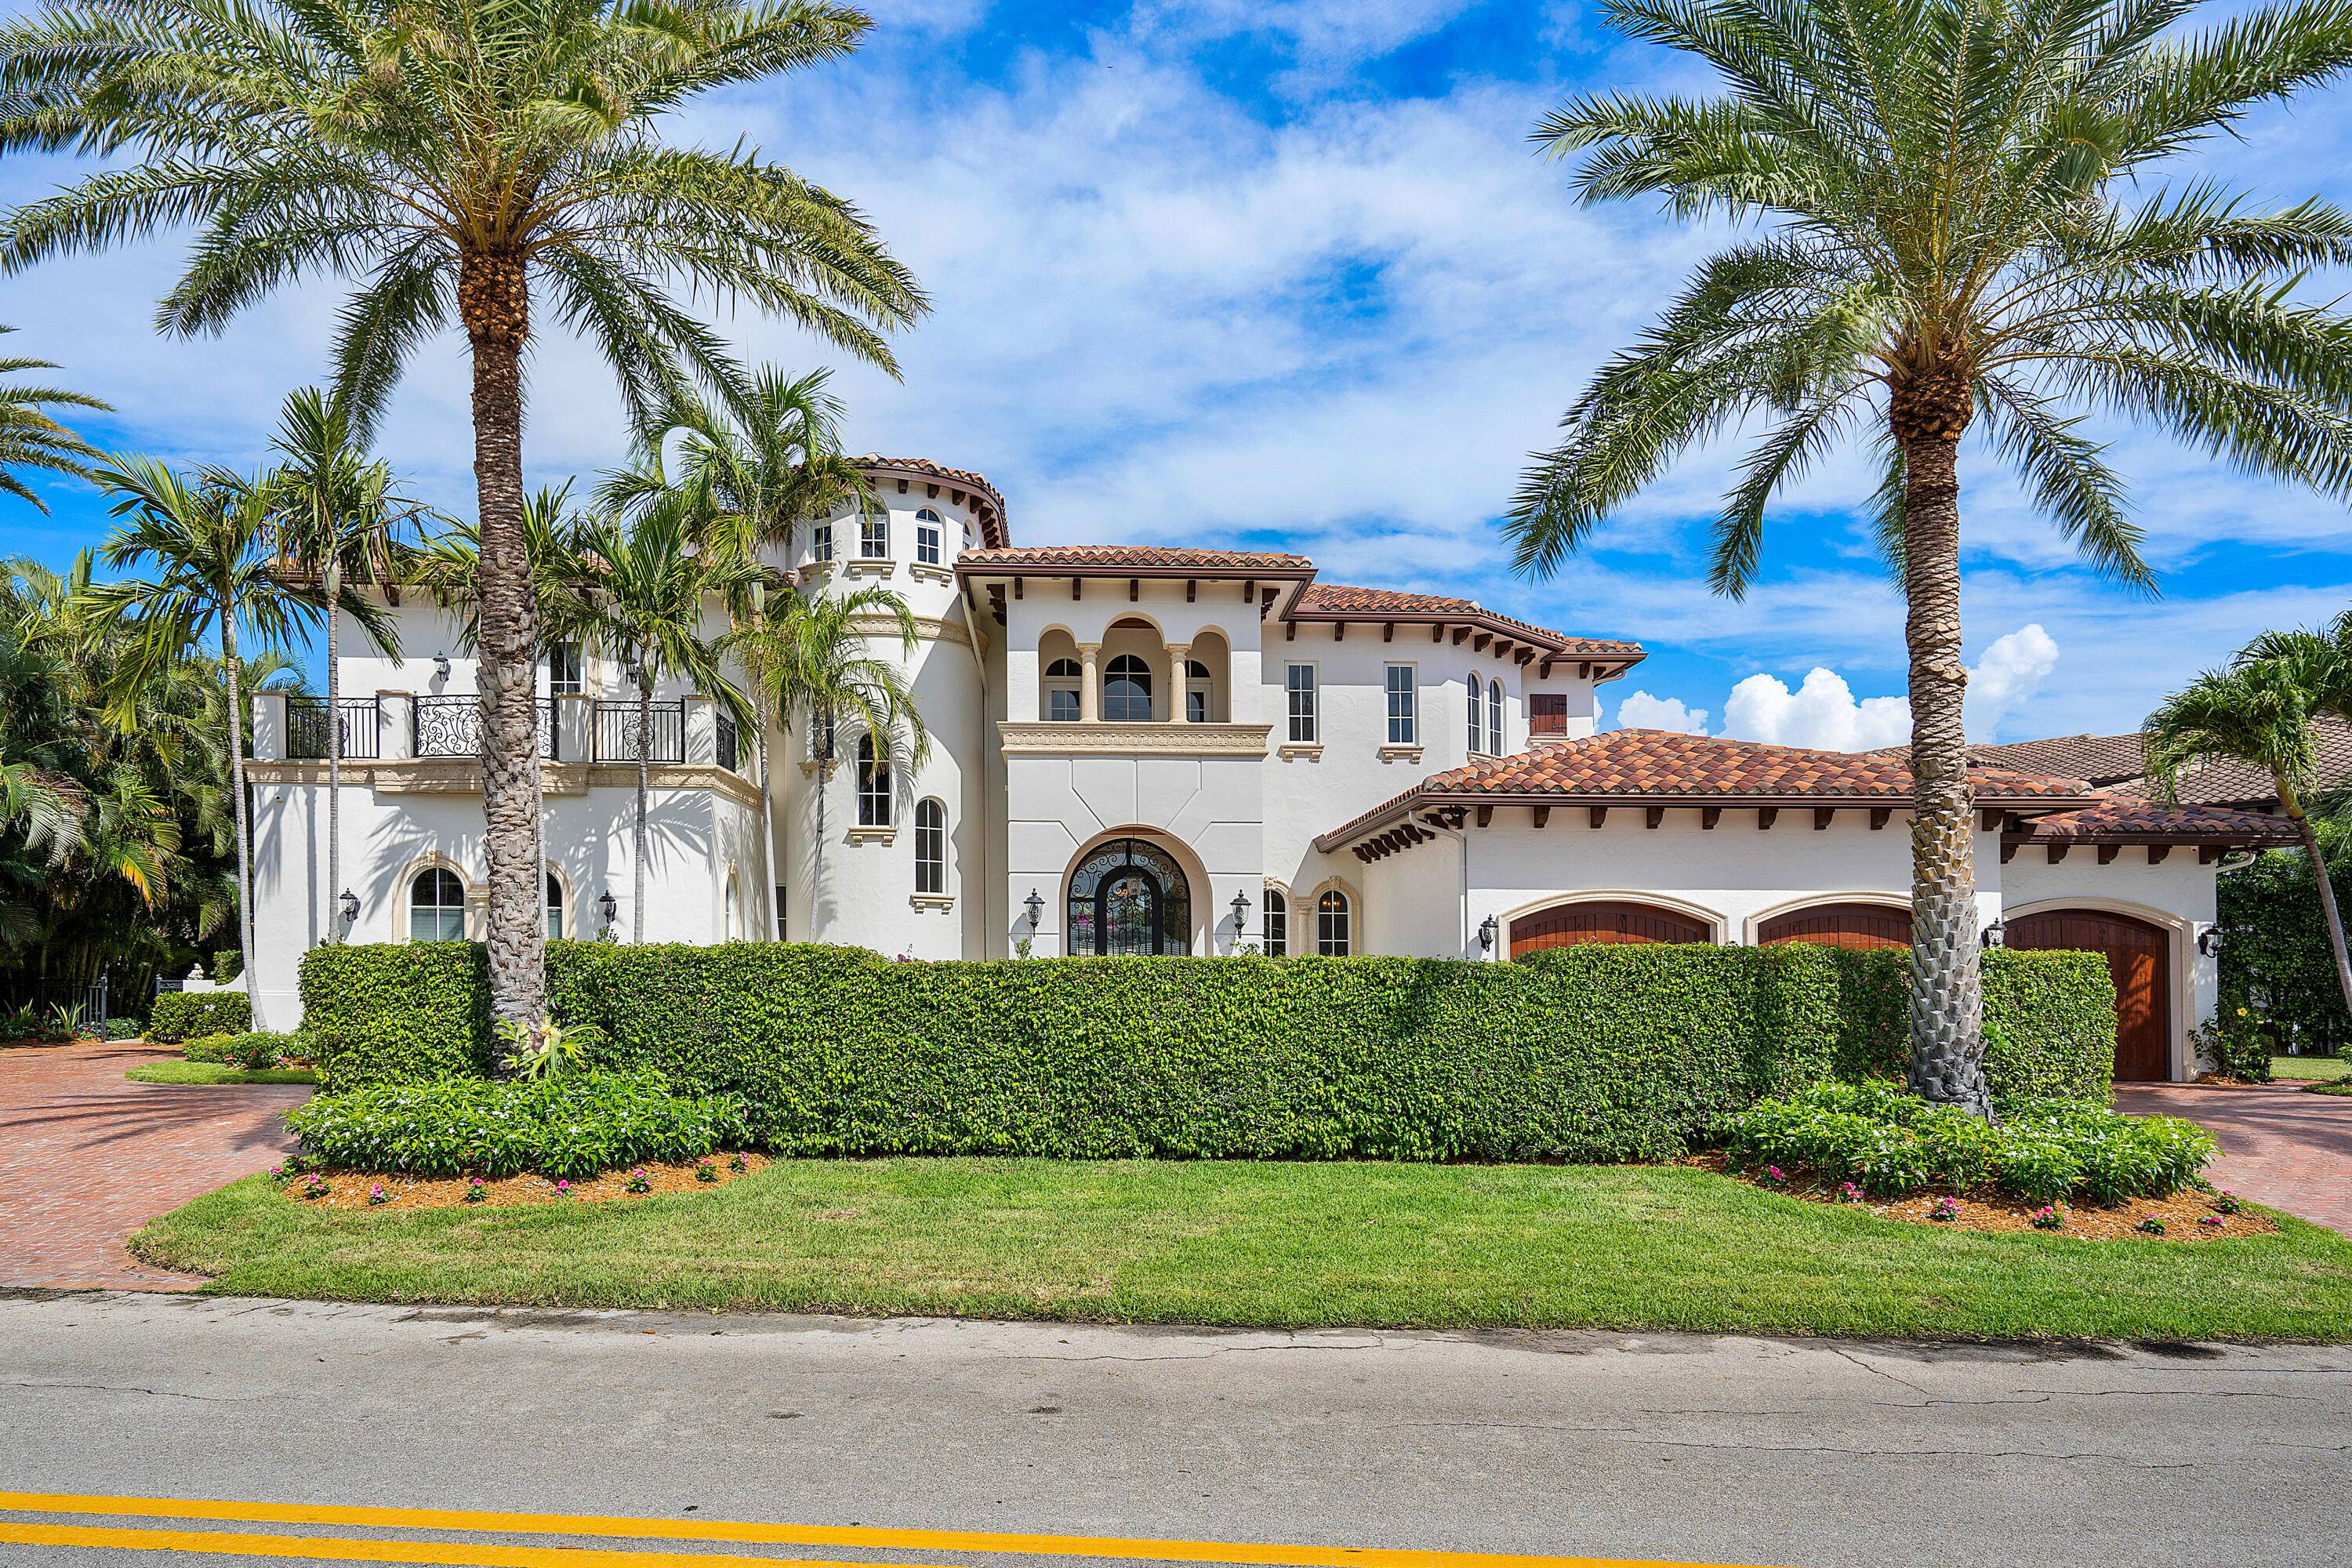 A unique opportunity to own this gorgeous estate located in the premier oceanside community of Sun and Surf.